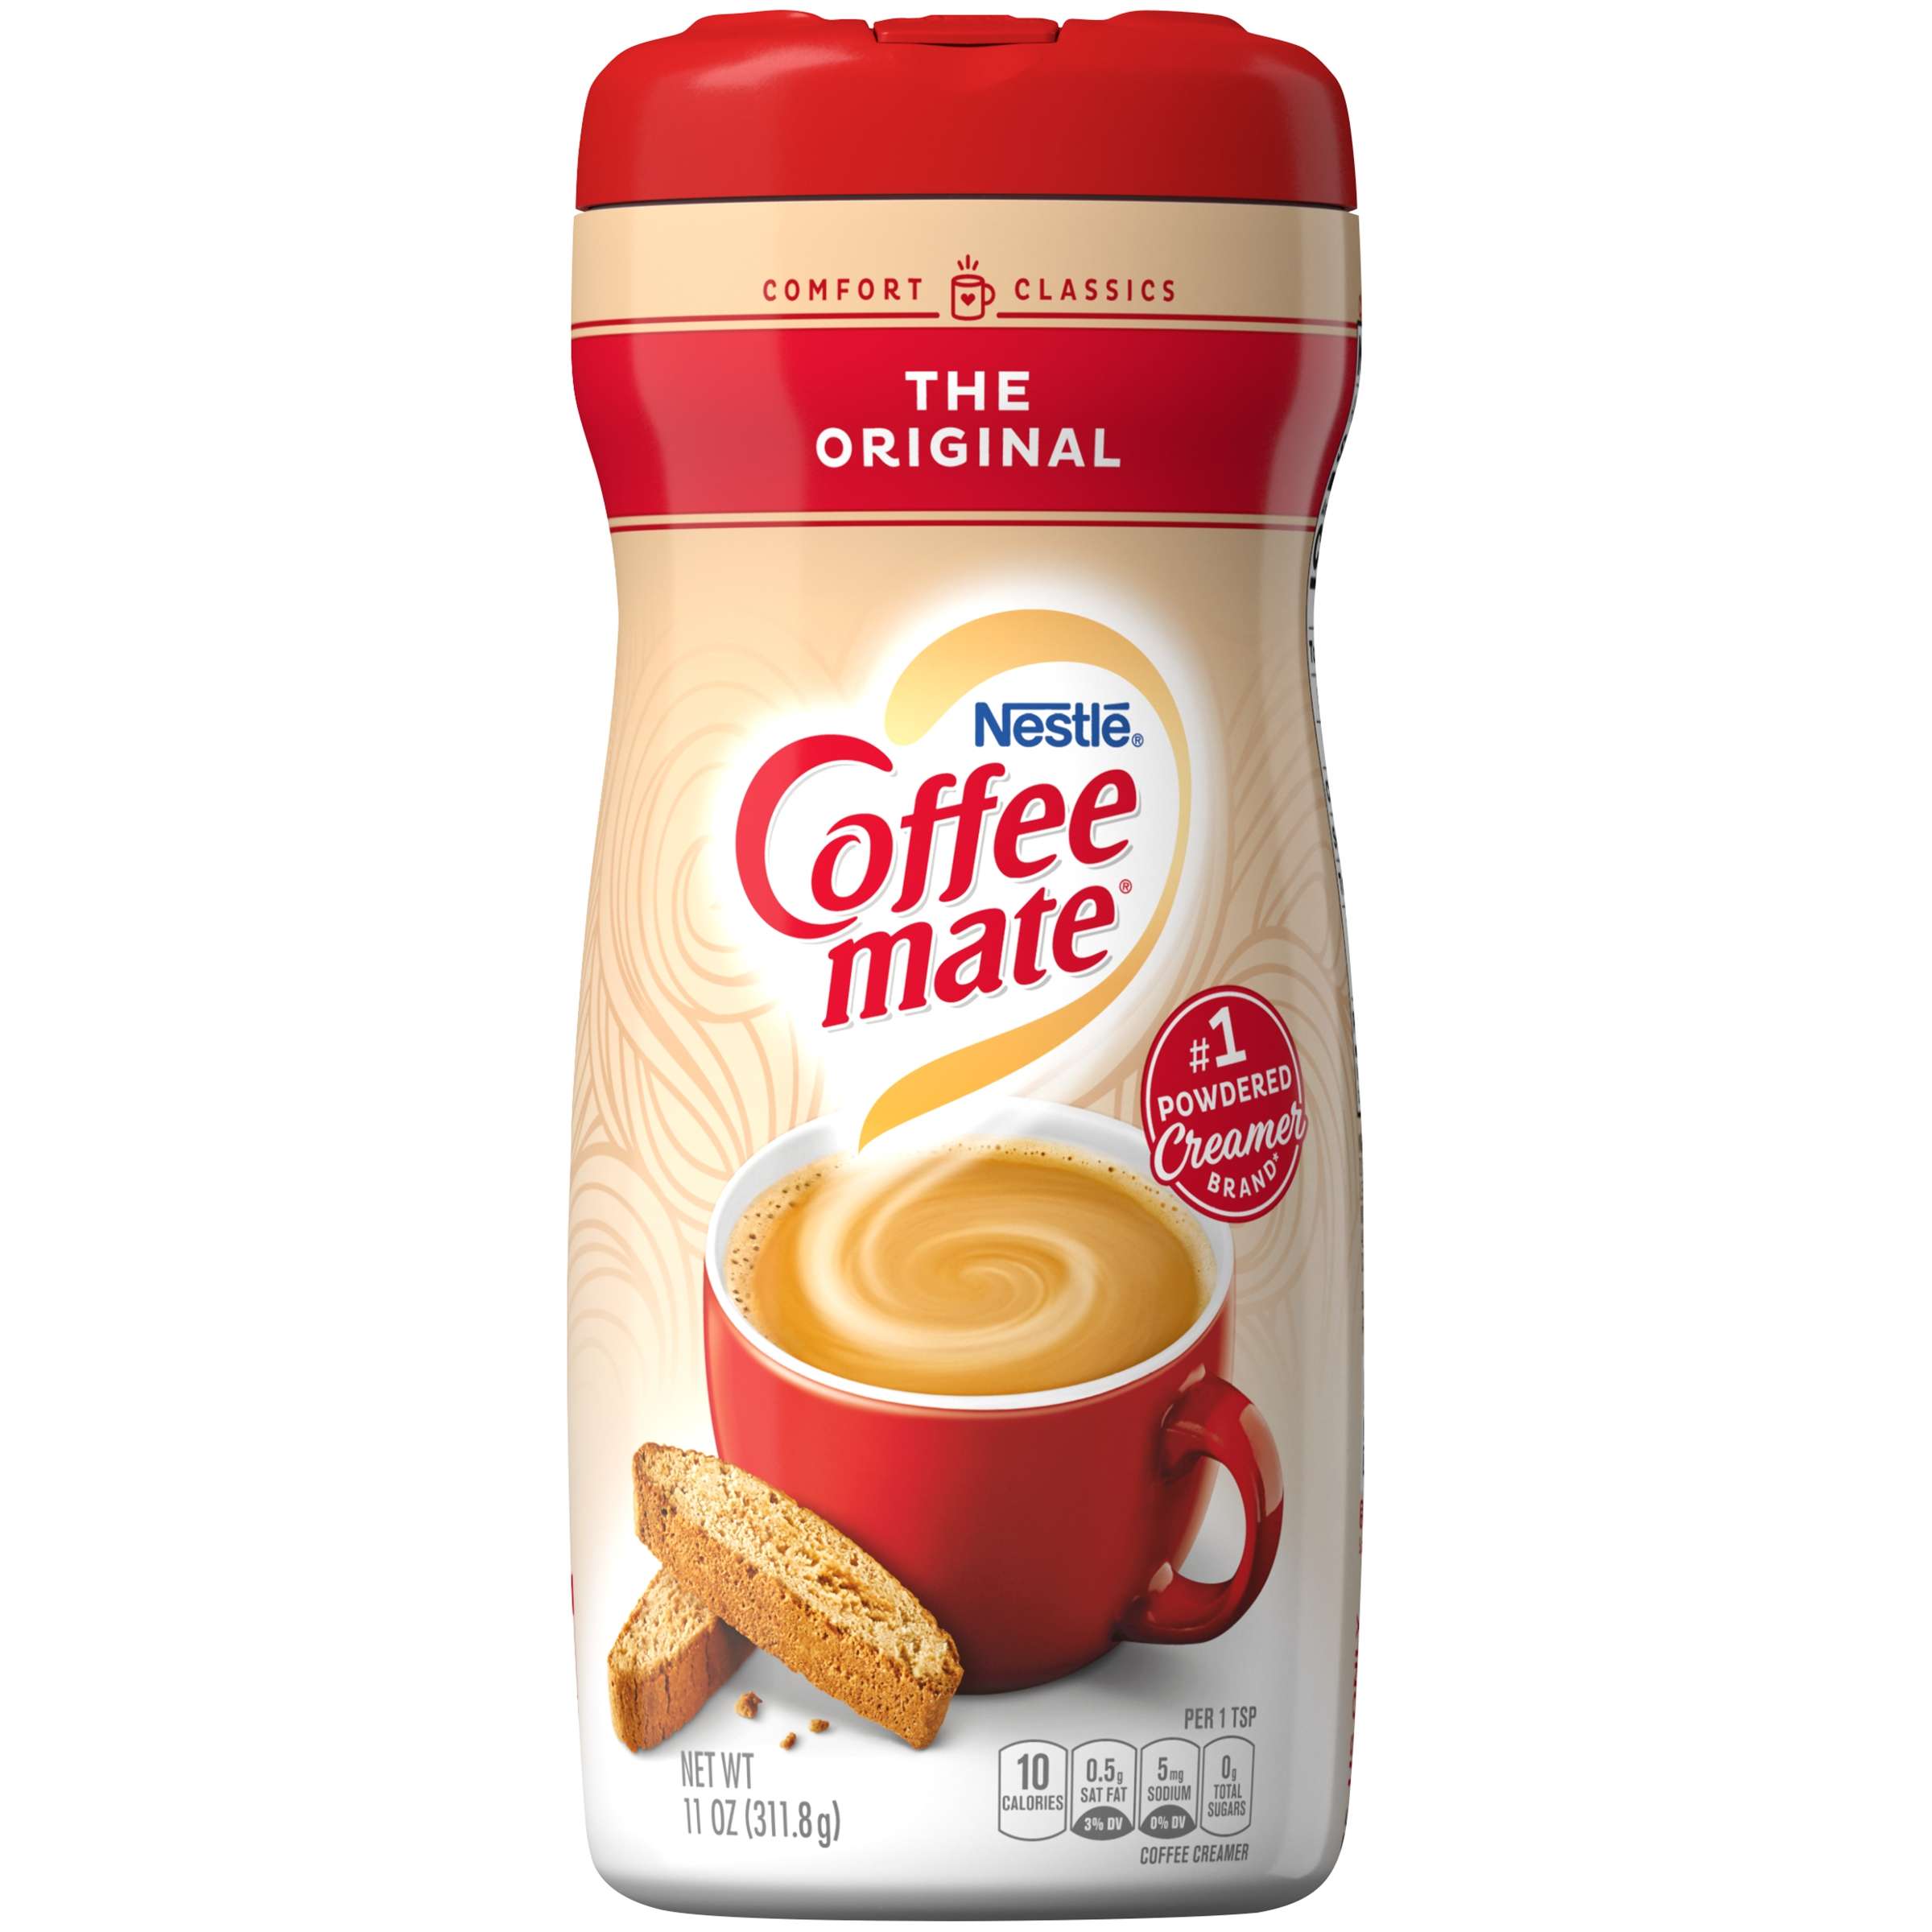 COFFEE MATE The Original Powdered Coffee Creamer 11 Oz. Canister